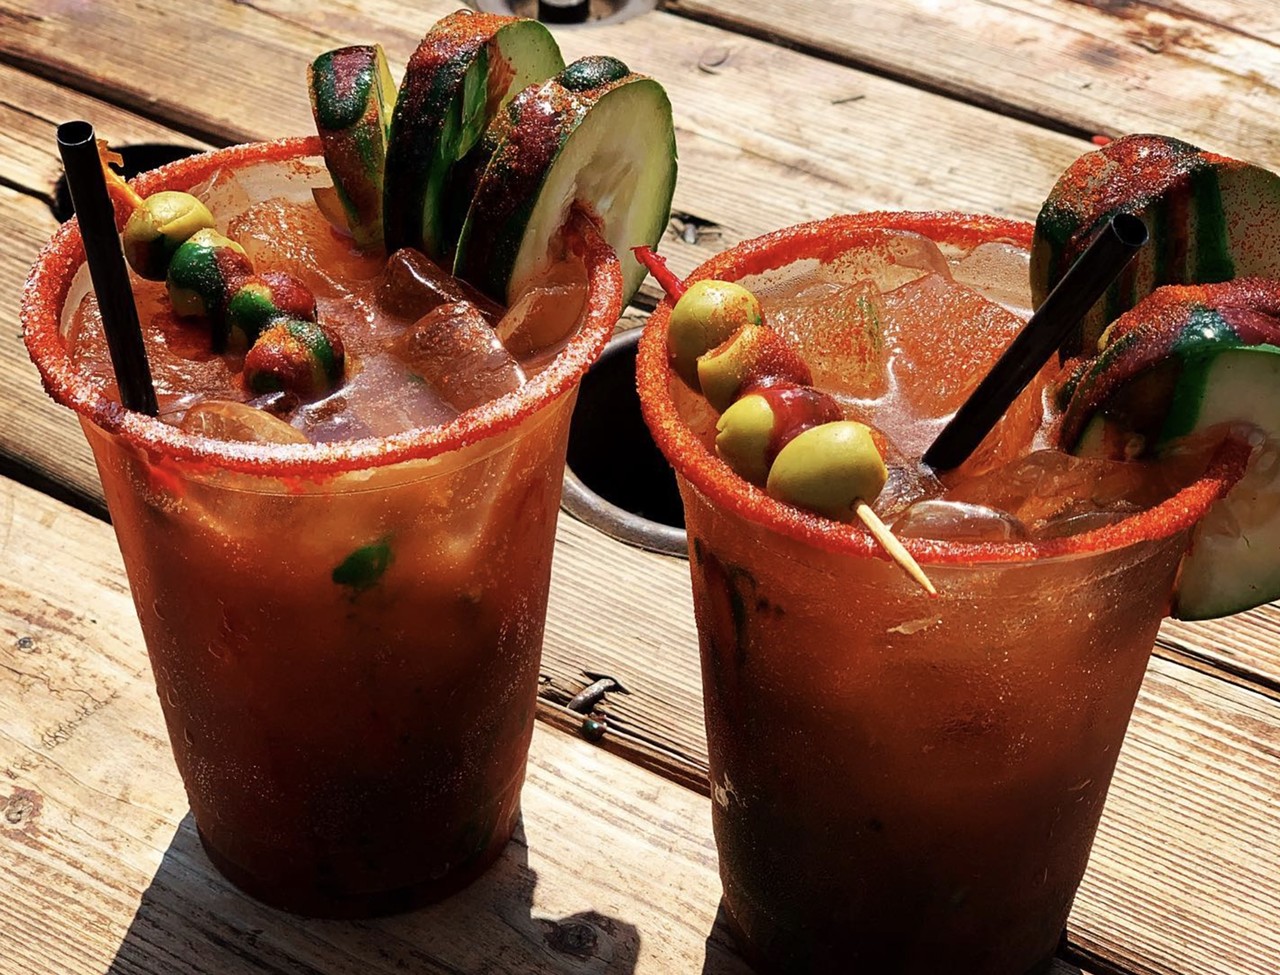 Micheladas
San Antonio loves a good Bloody Mary, but it isn’t the only savory cocktail in the spotlight. Whether you’re looking for a hangover cure or to spice up your brunch, a Michelada may be your best bet. The beer-based cocktail can be found all over town at eateries and drinkeries including Rosario’s and the Social Spot.
Photo via Instagram / social_spot_satx